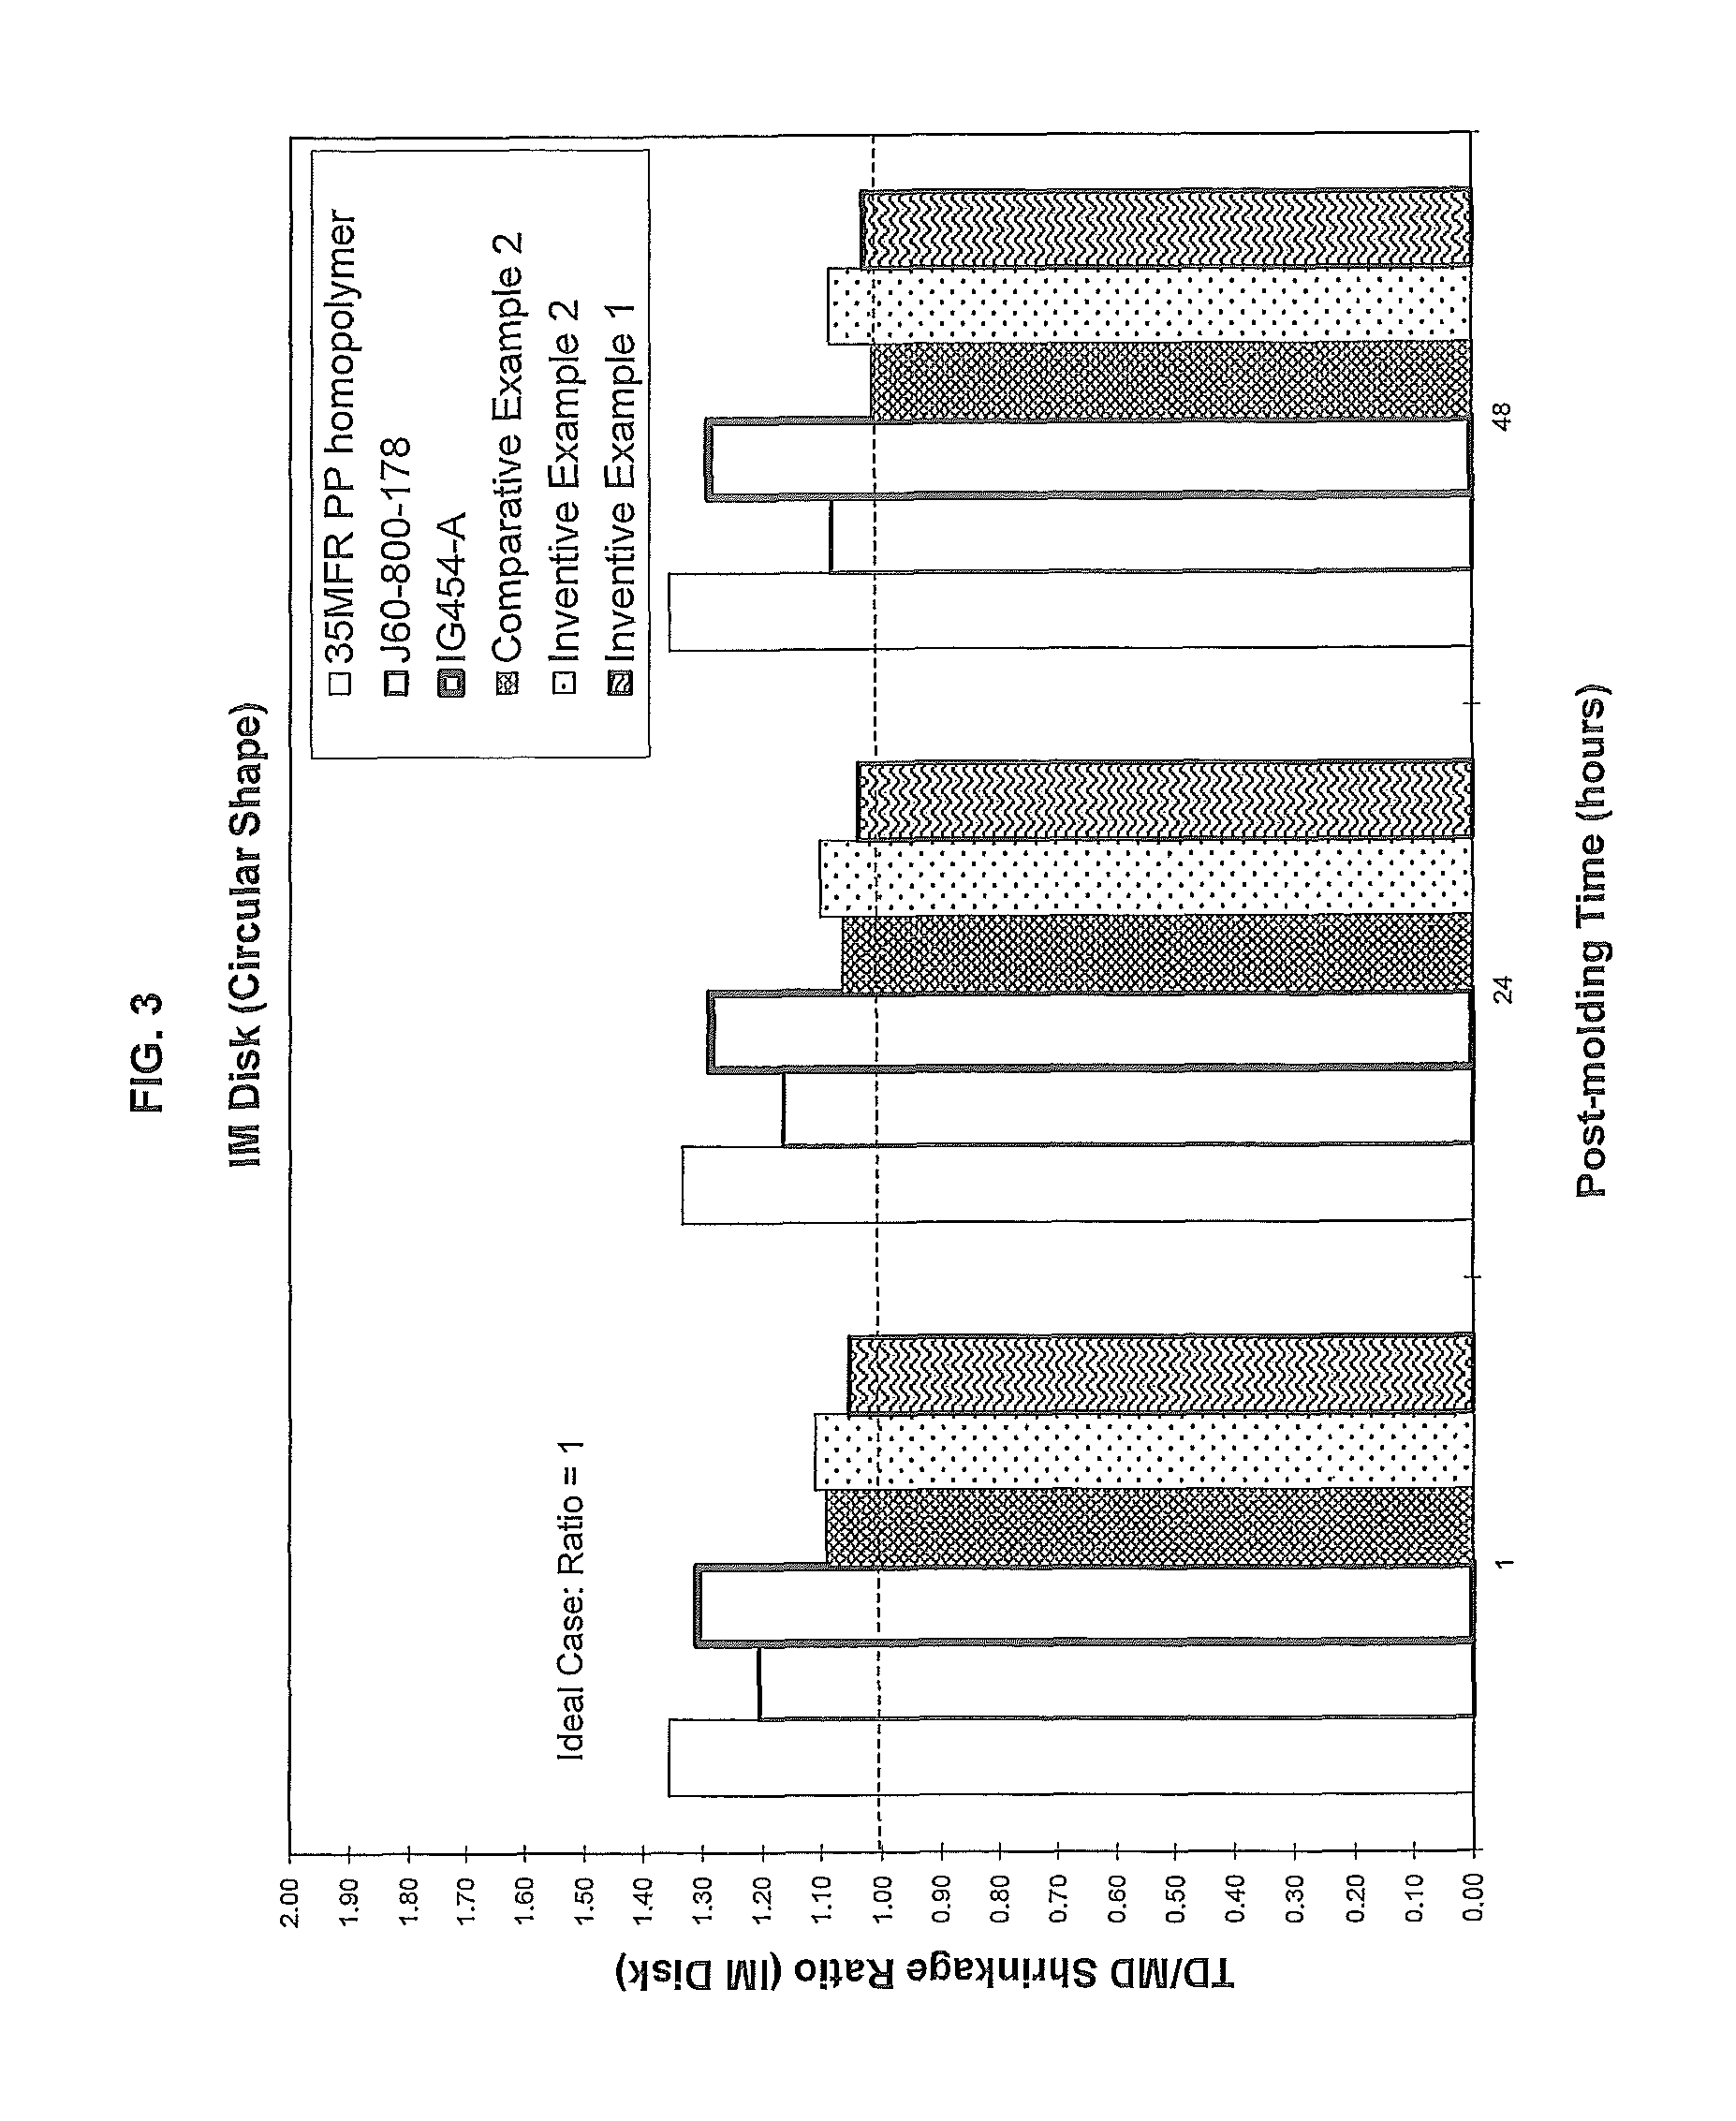 Polyethylene compositions having high dimensional stability and excellent processability for caps and closures